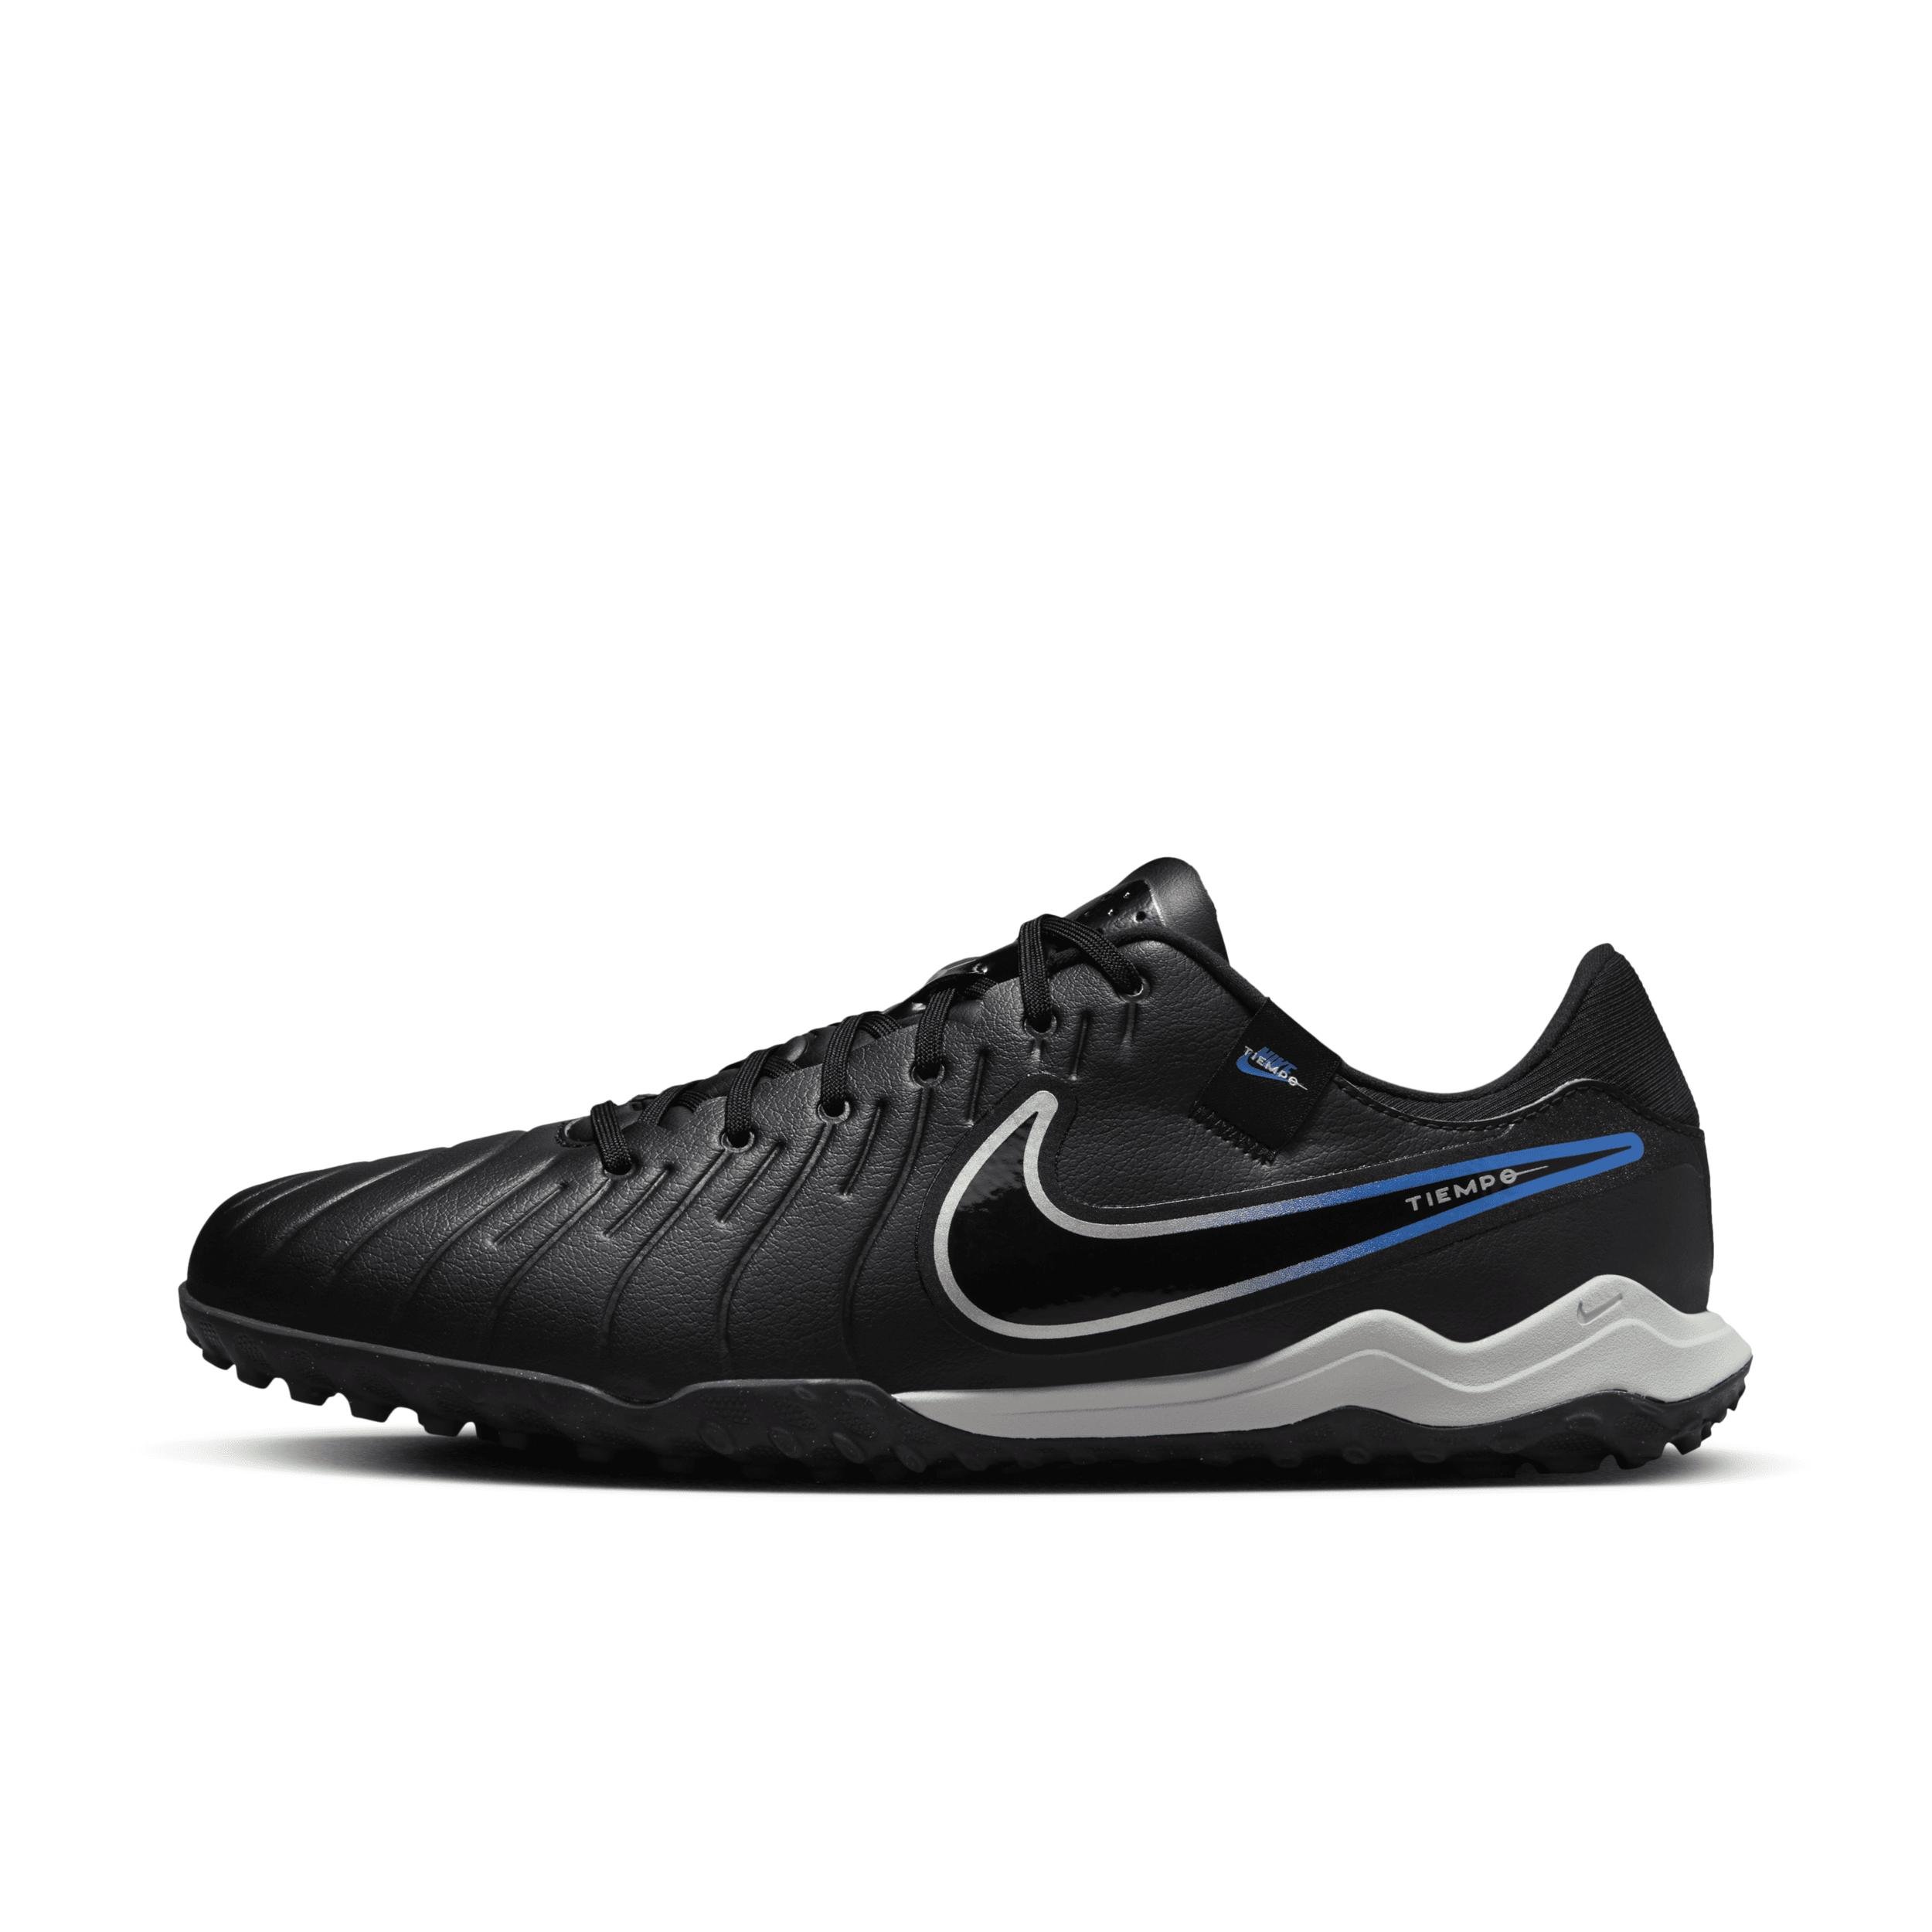 Nike Men's Tiempo Legend 10 Academy Turf Low-Top Soccer Shoes by NIKE